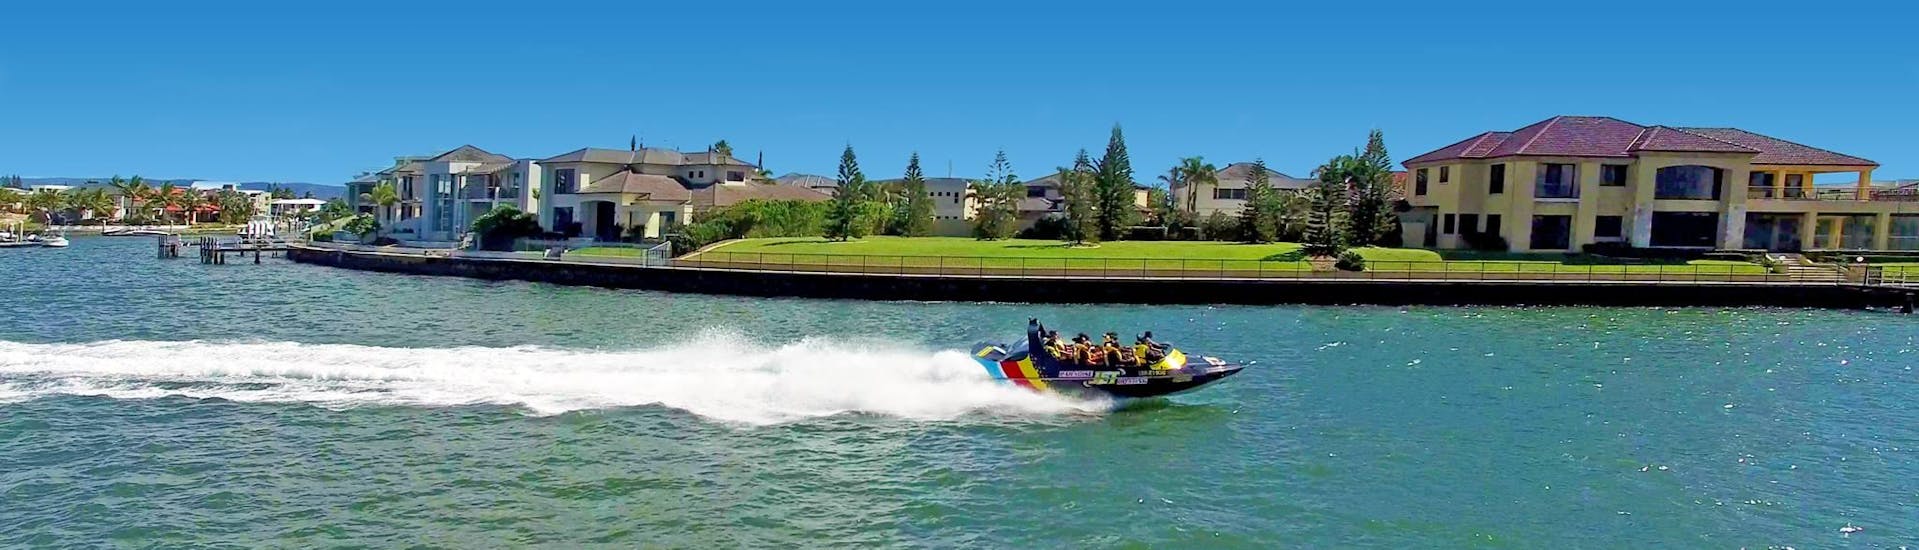 Cruising on the river during Tour in a Jet Boat on the Gold Coast - Surfers Paradise organized by Paradise Jet Boating Gold Coast